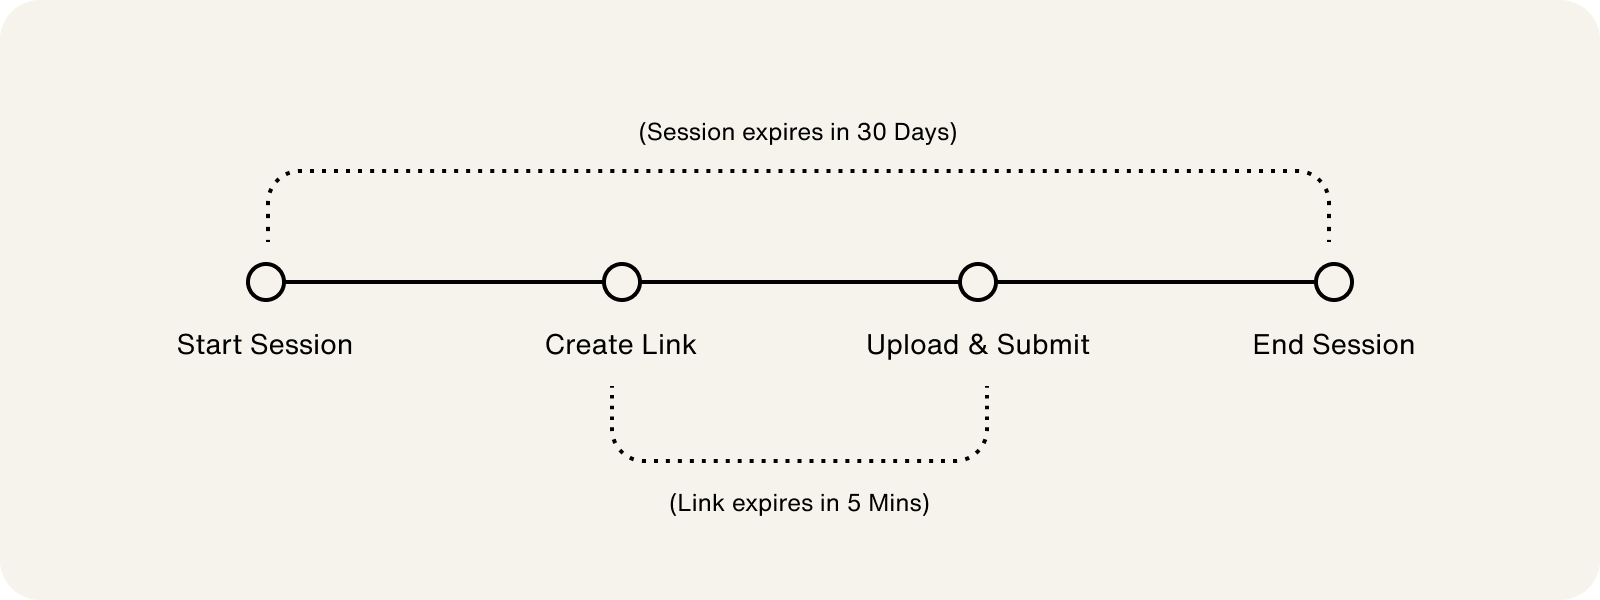 document-upload-status-lifecycle.png